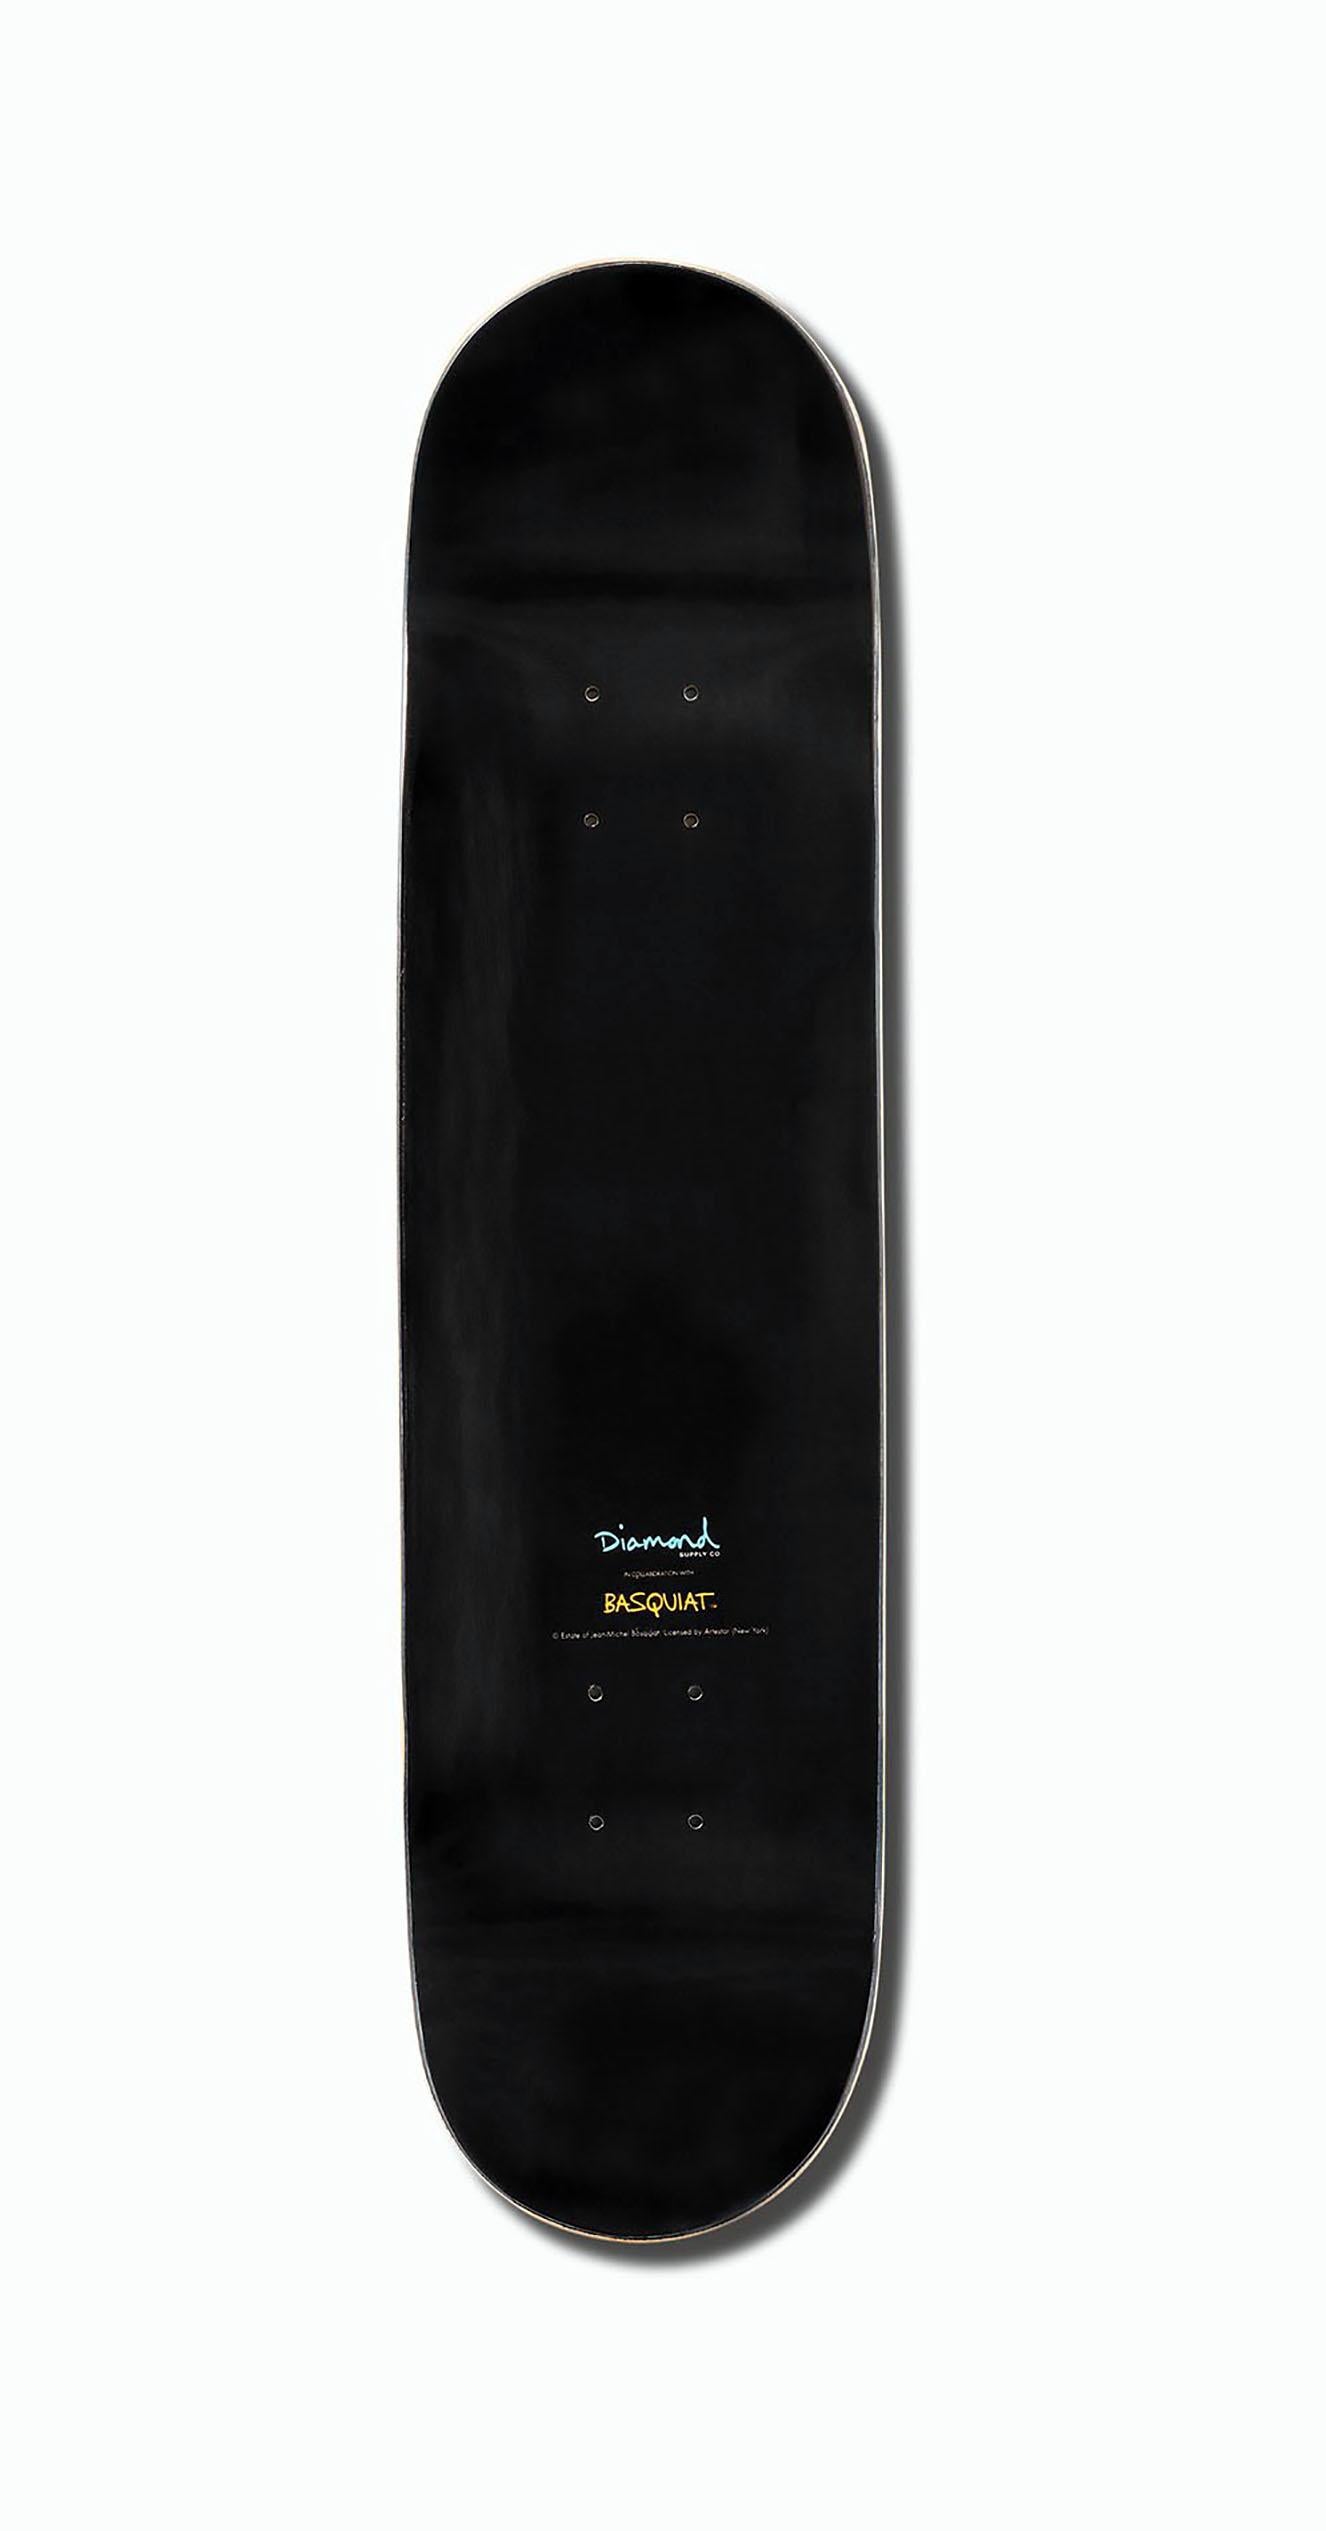 Basquiat Negro Athletes Skateboard Deck 
Limited edition Basquiat skate deck licensed by the Estate of Jean Michel Basquiat in conjunction with Artestar in 2018, featuring offset imagery of Basquiat's early Negro Athletes drawing. Makes for unique,